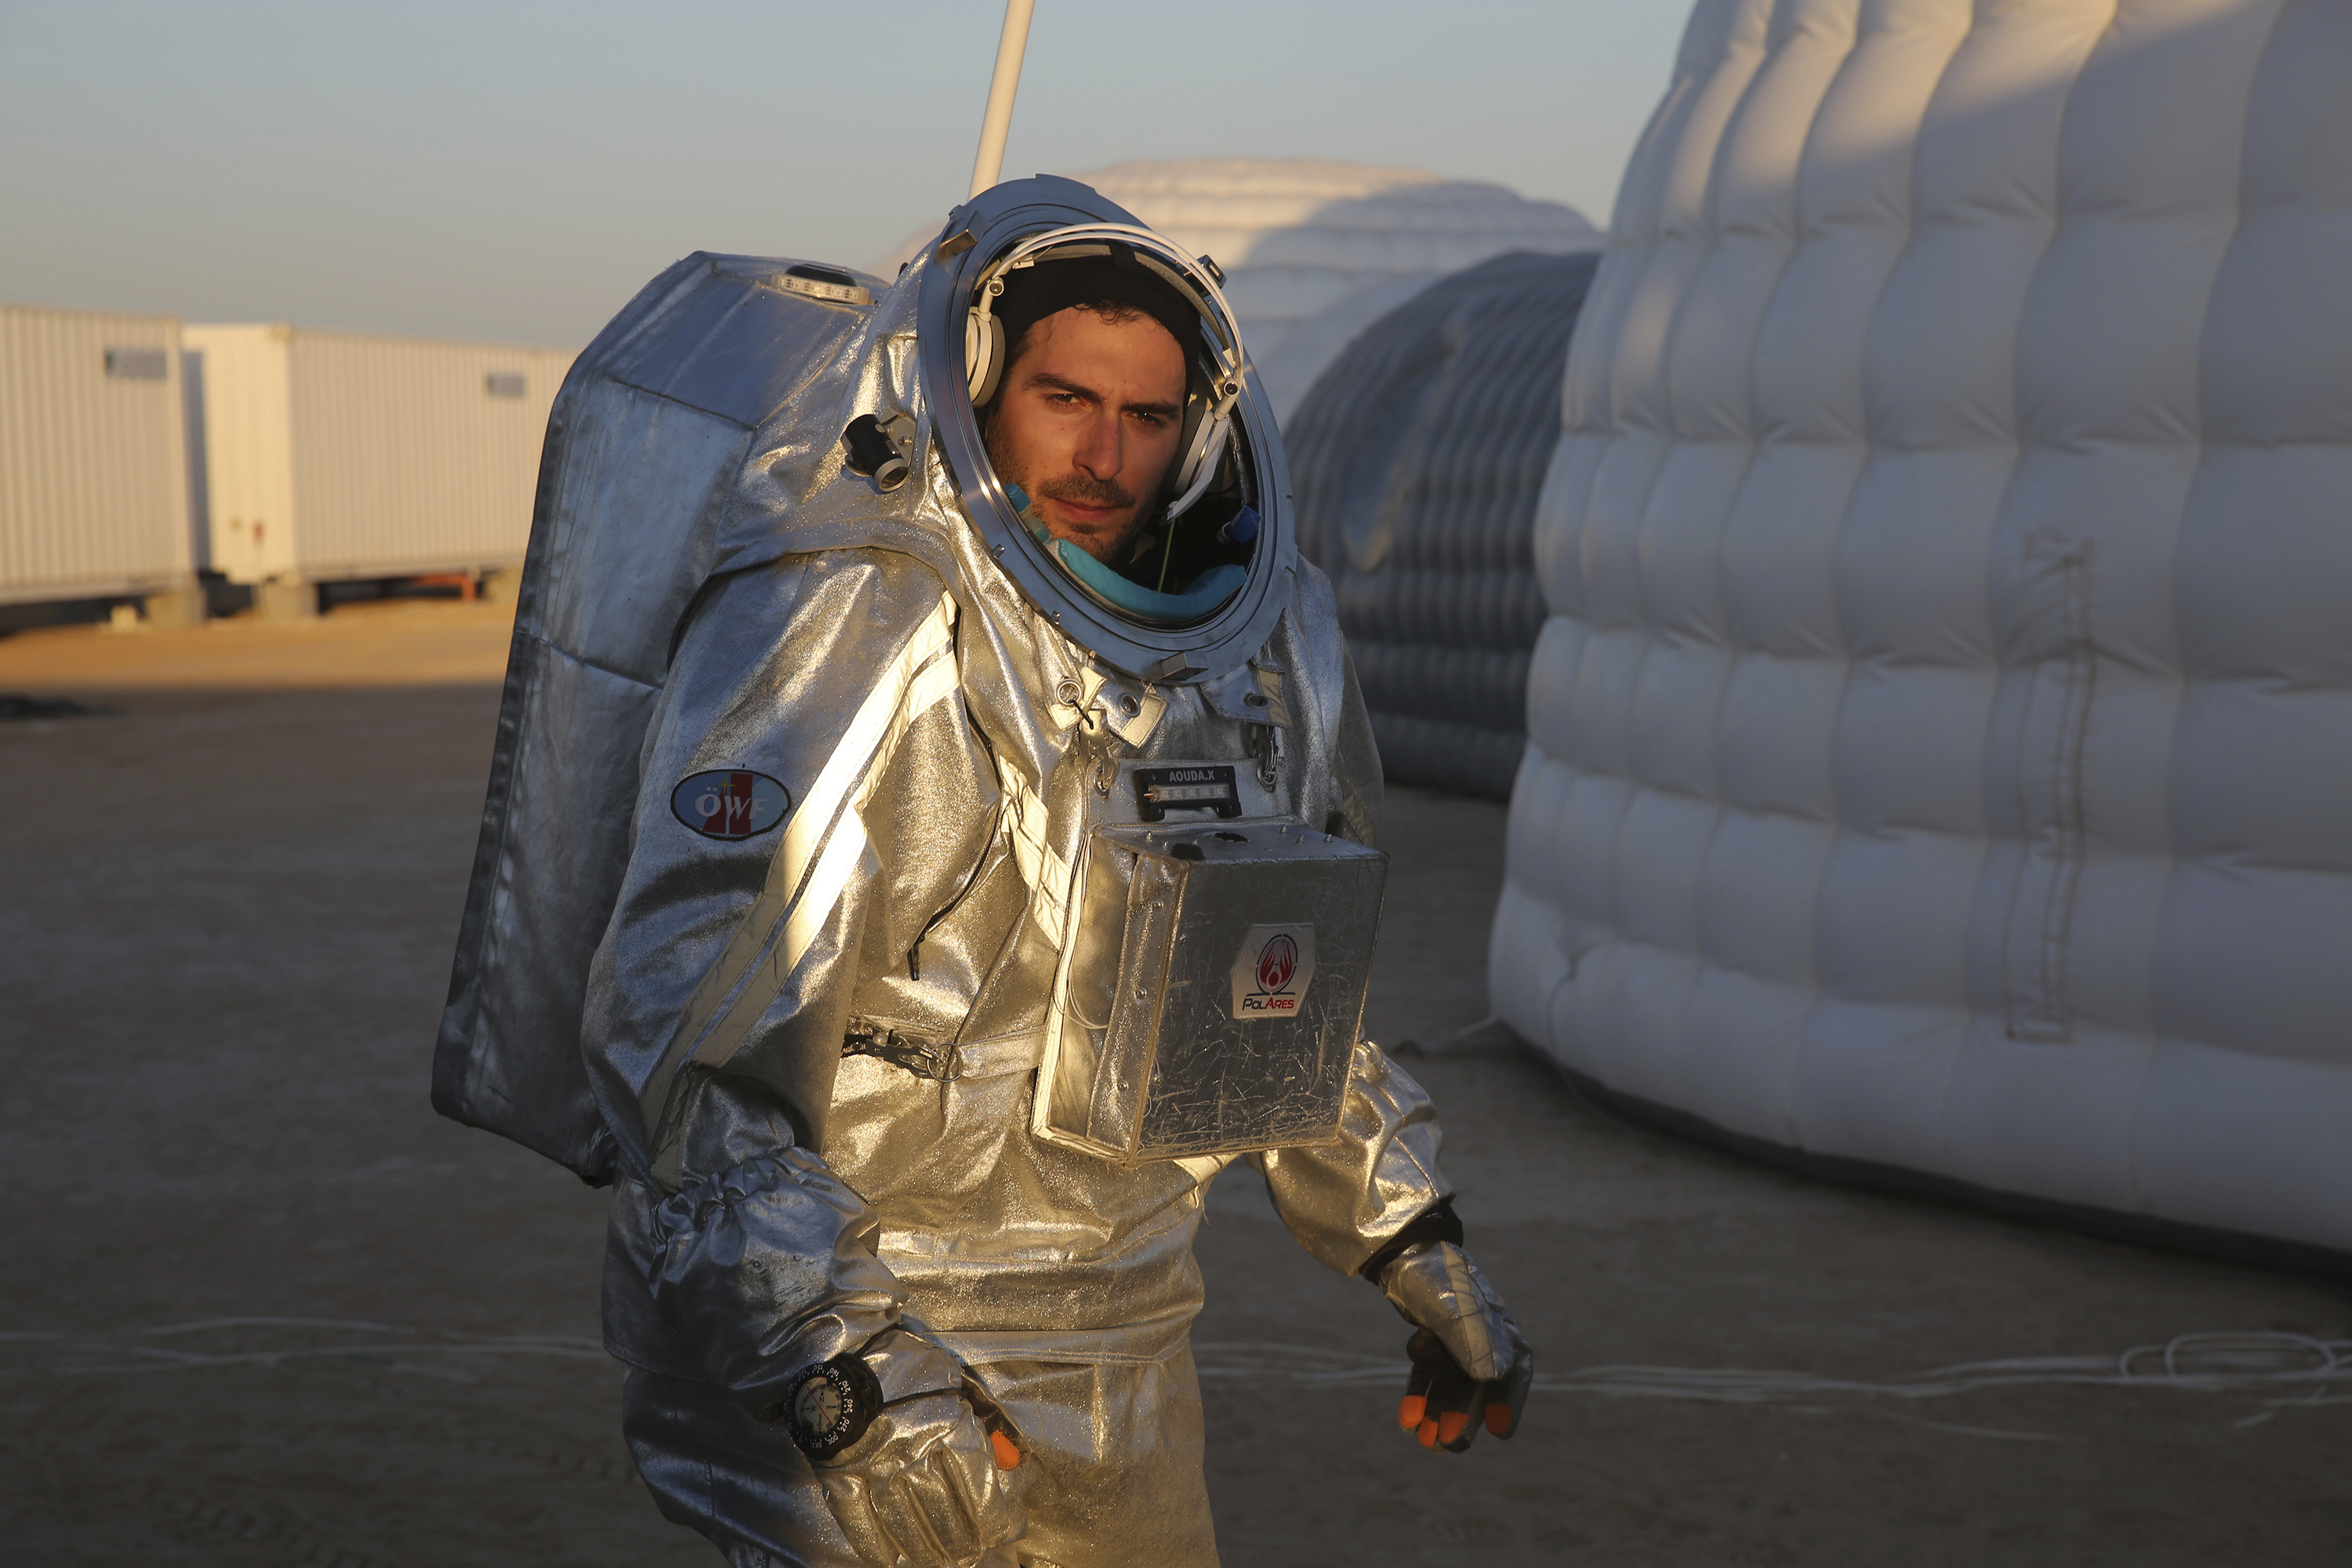 Joao Lousada, a flight controller for the International Space Station, wearing an experimental space suit during a simulation of a future Mars mission in the Dhofar desert of southern Oman (Sam McNeil/AP)